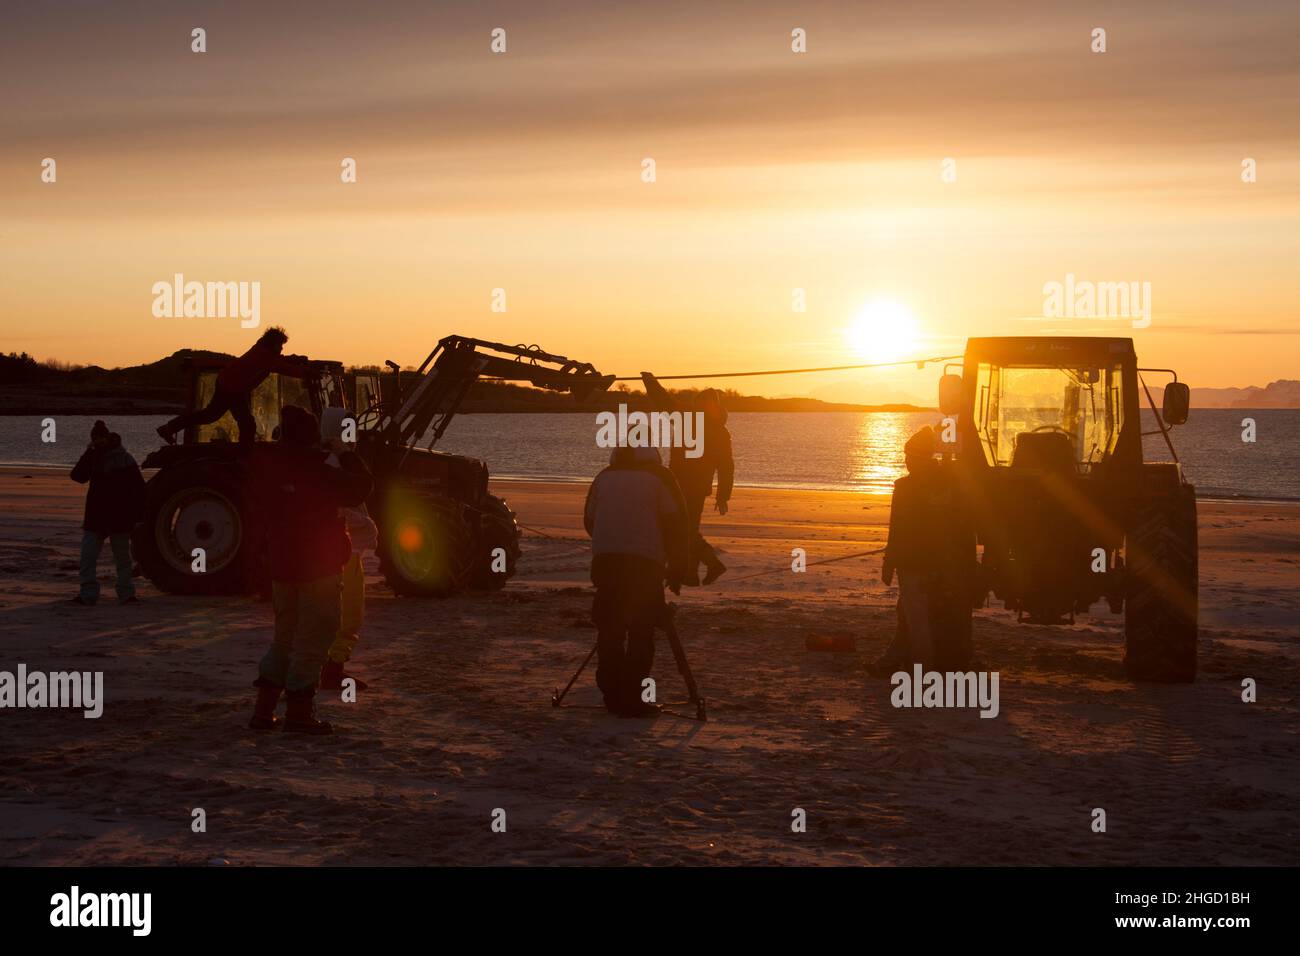 Playing with slack line between two tractors on the beach in Lofoten islands, northern Norway in the sunset Stock Photo